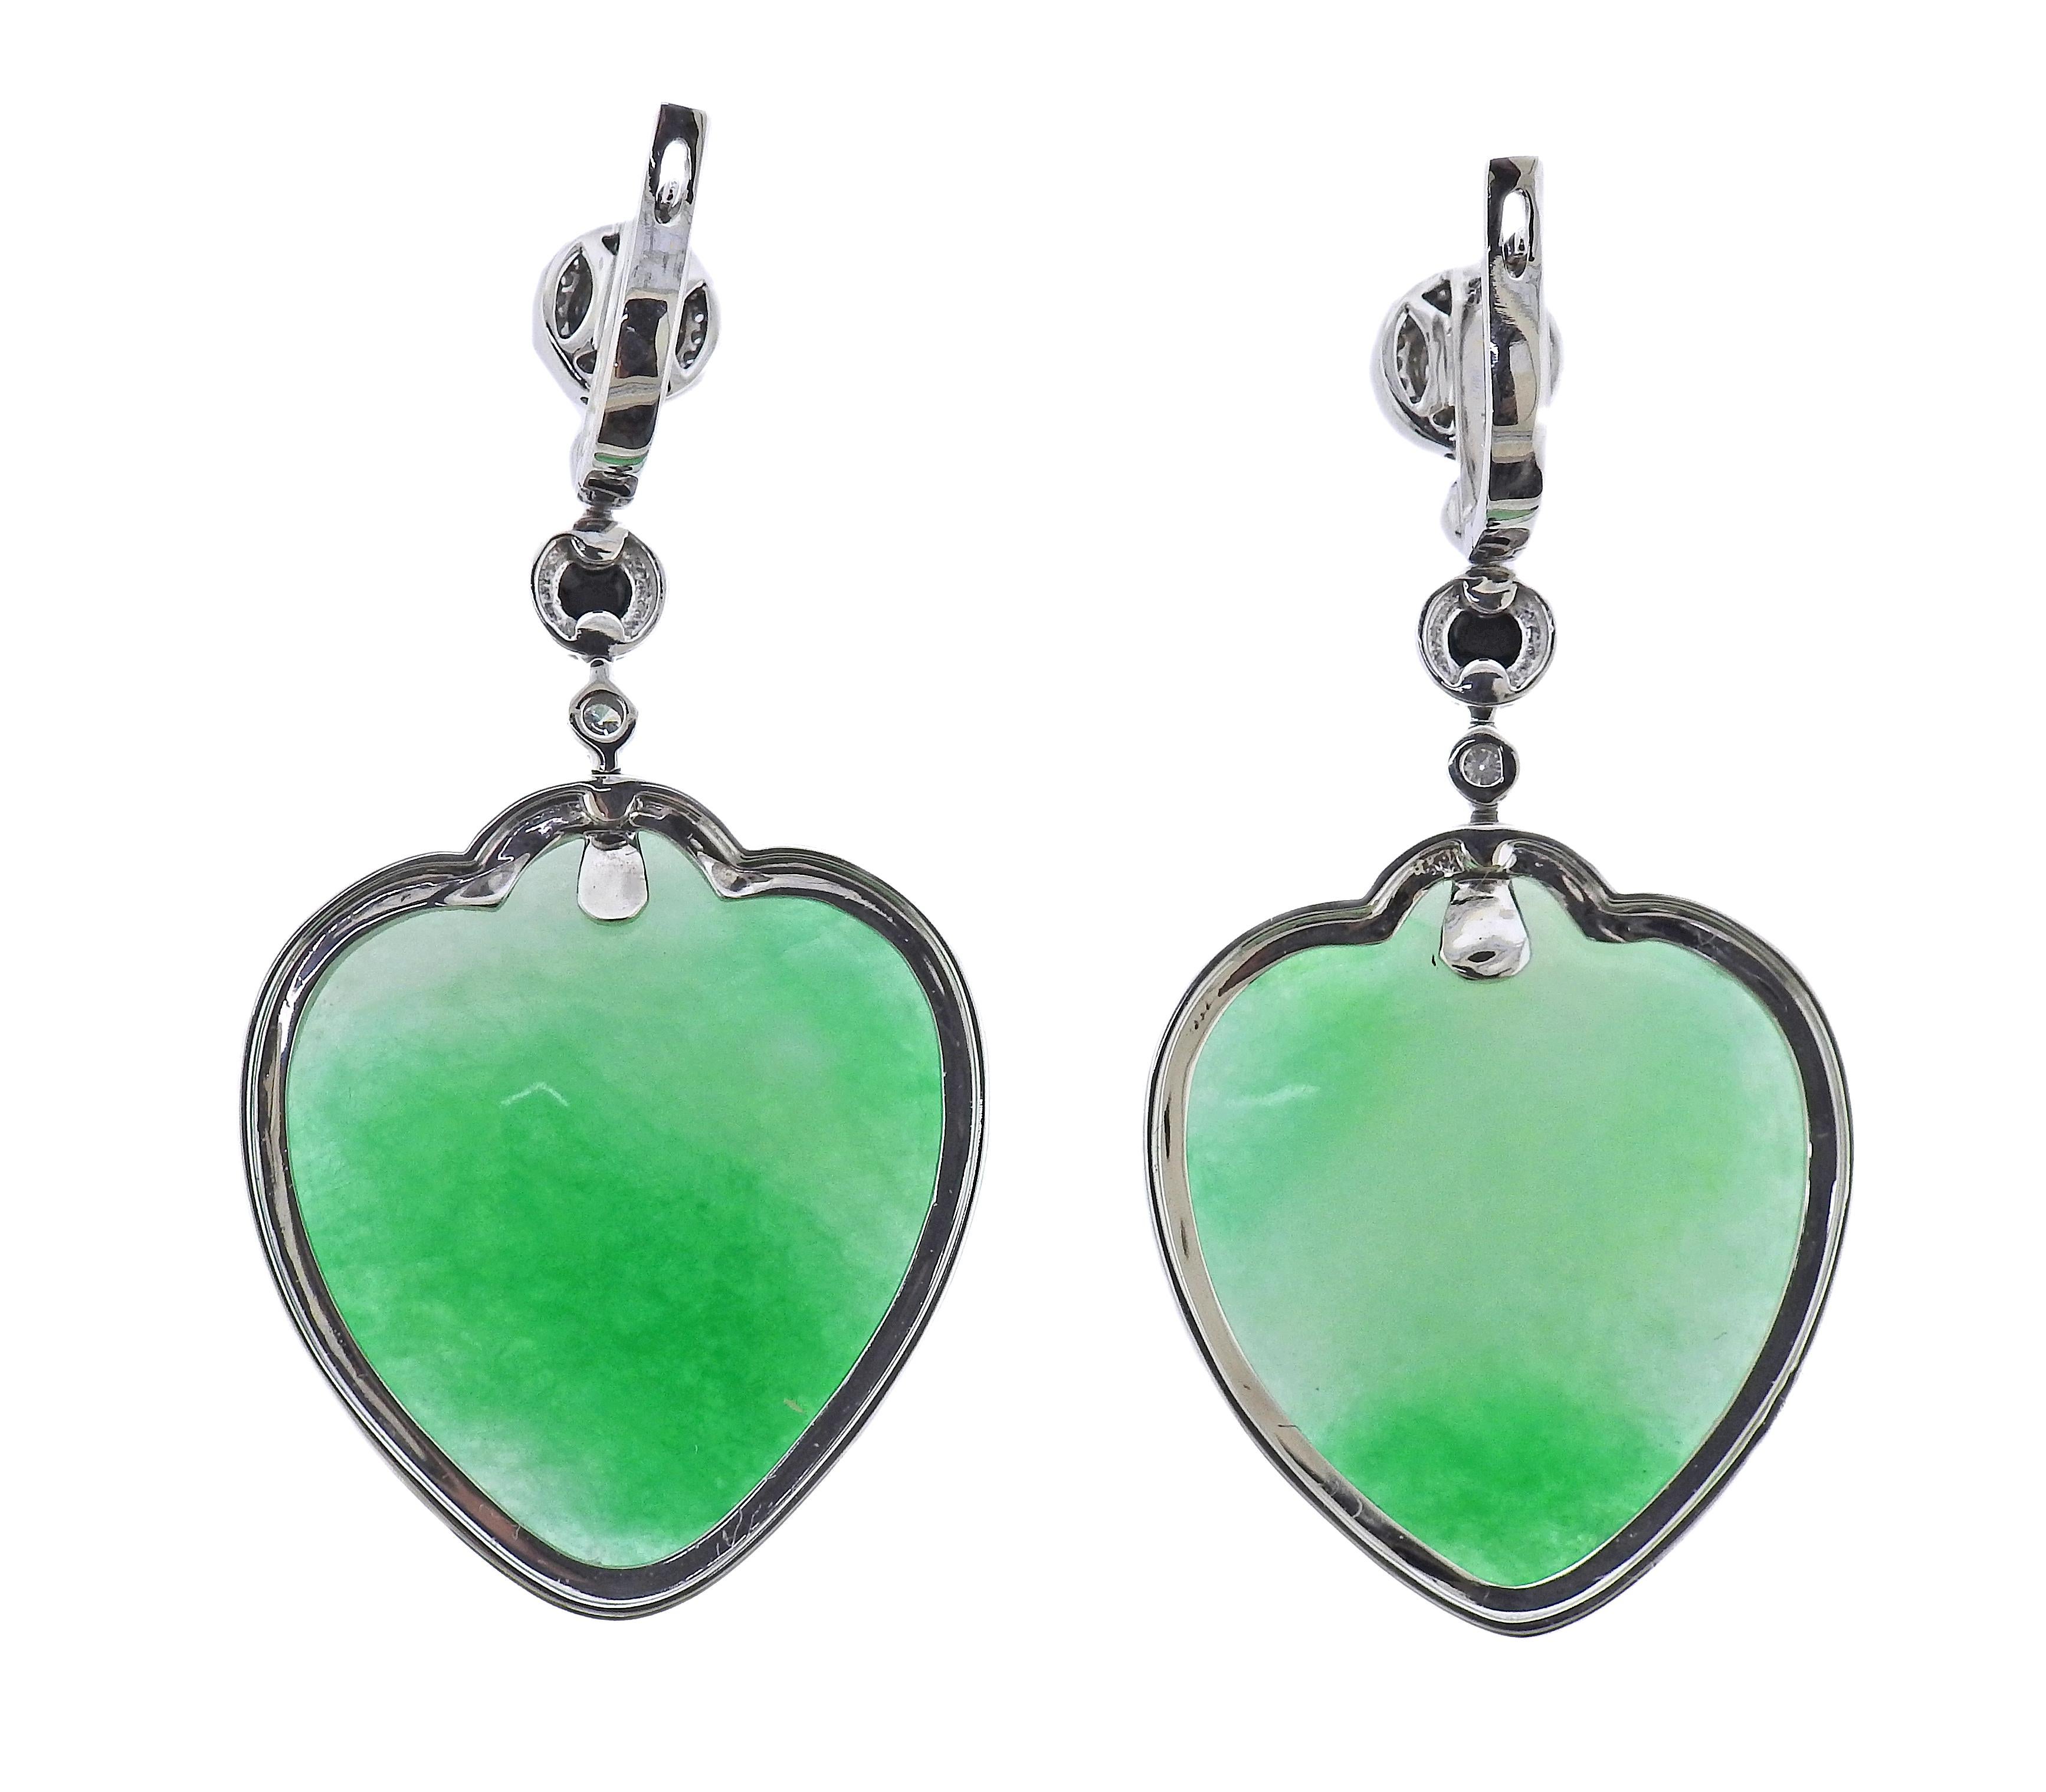 Pair of 18k gold drop earrings, with heart shaped 63.52ctw jadeite jade, onyx and 0.54ctw in diamonds. Earrings are 53mm x 28mm. Marked 750. Weight - 27.6 grams.